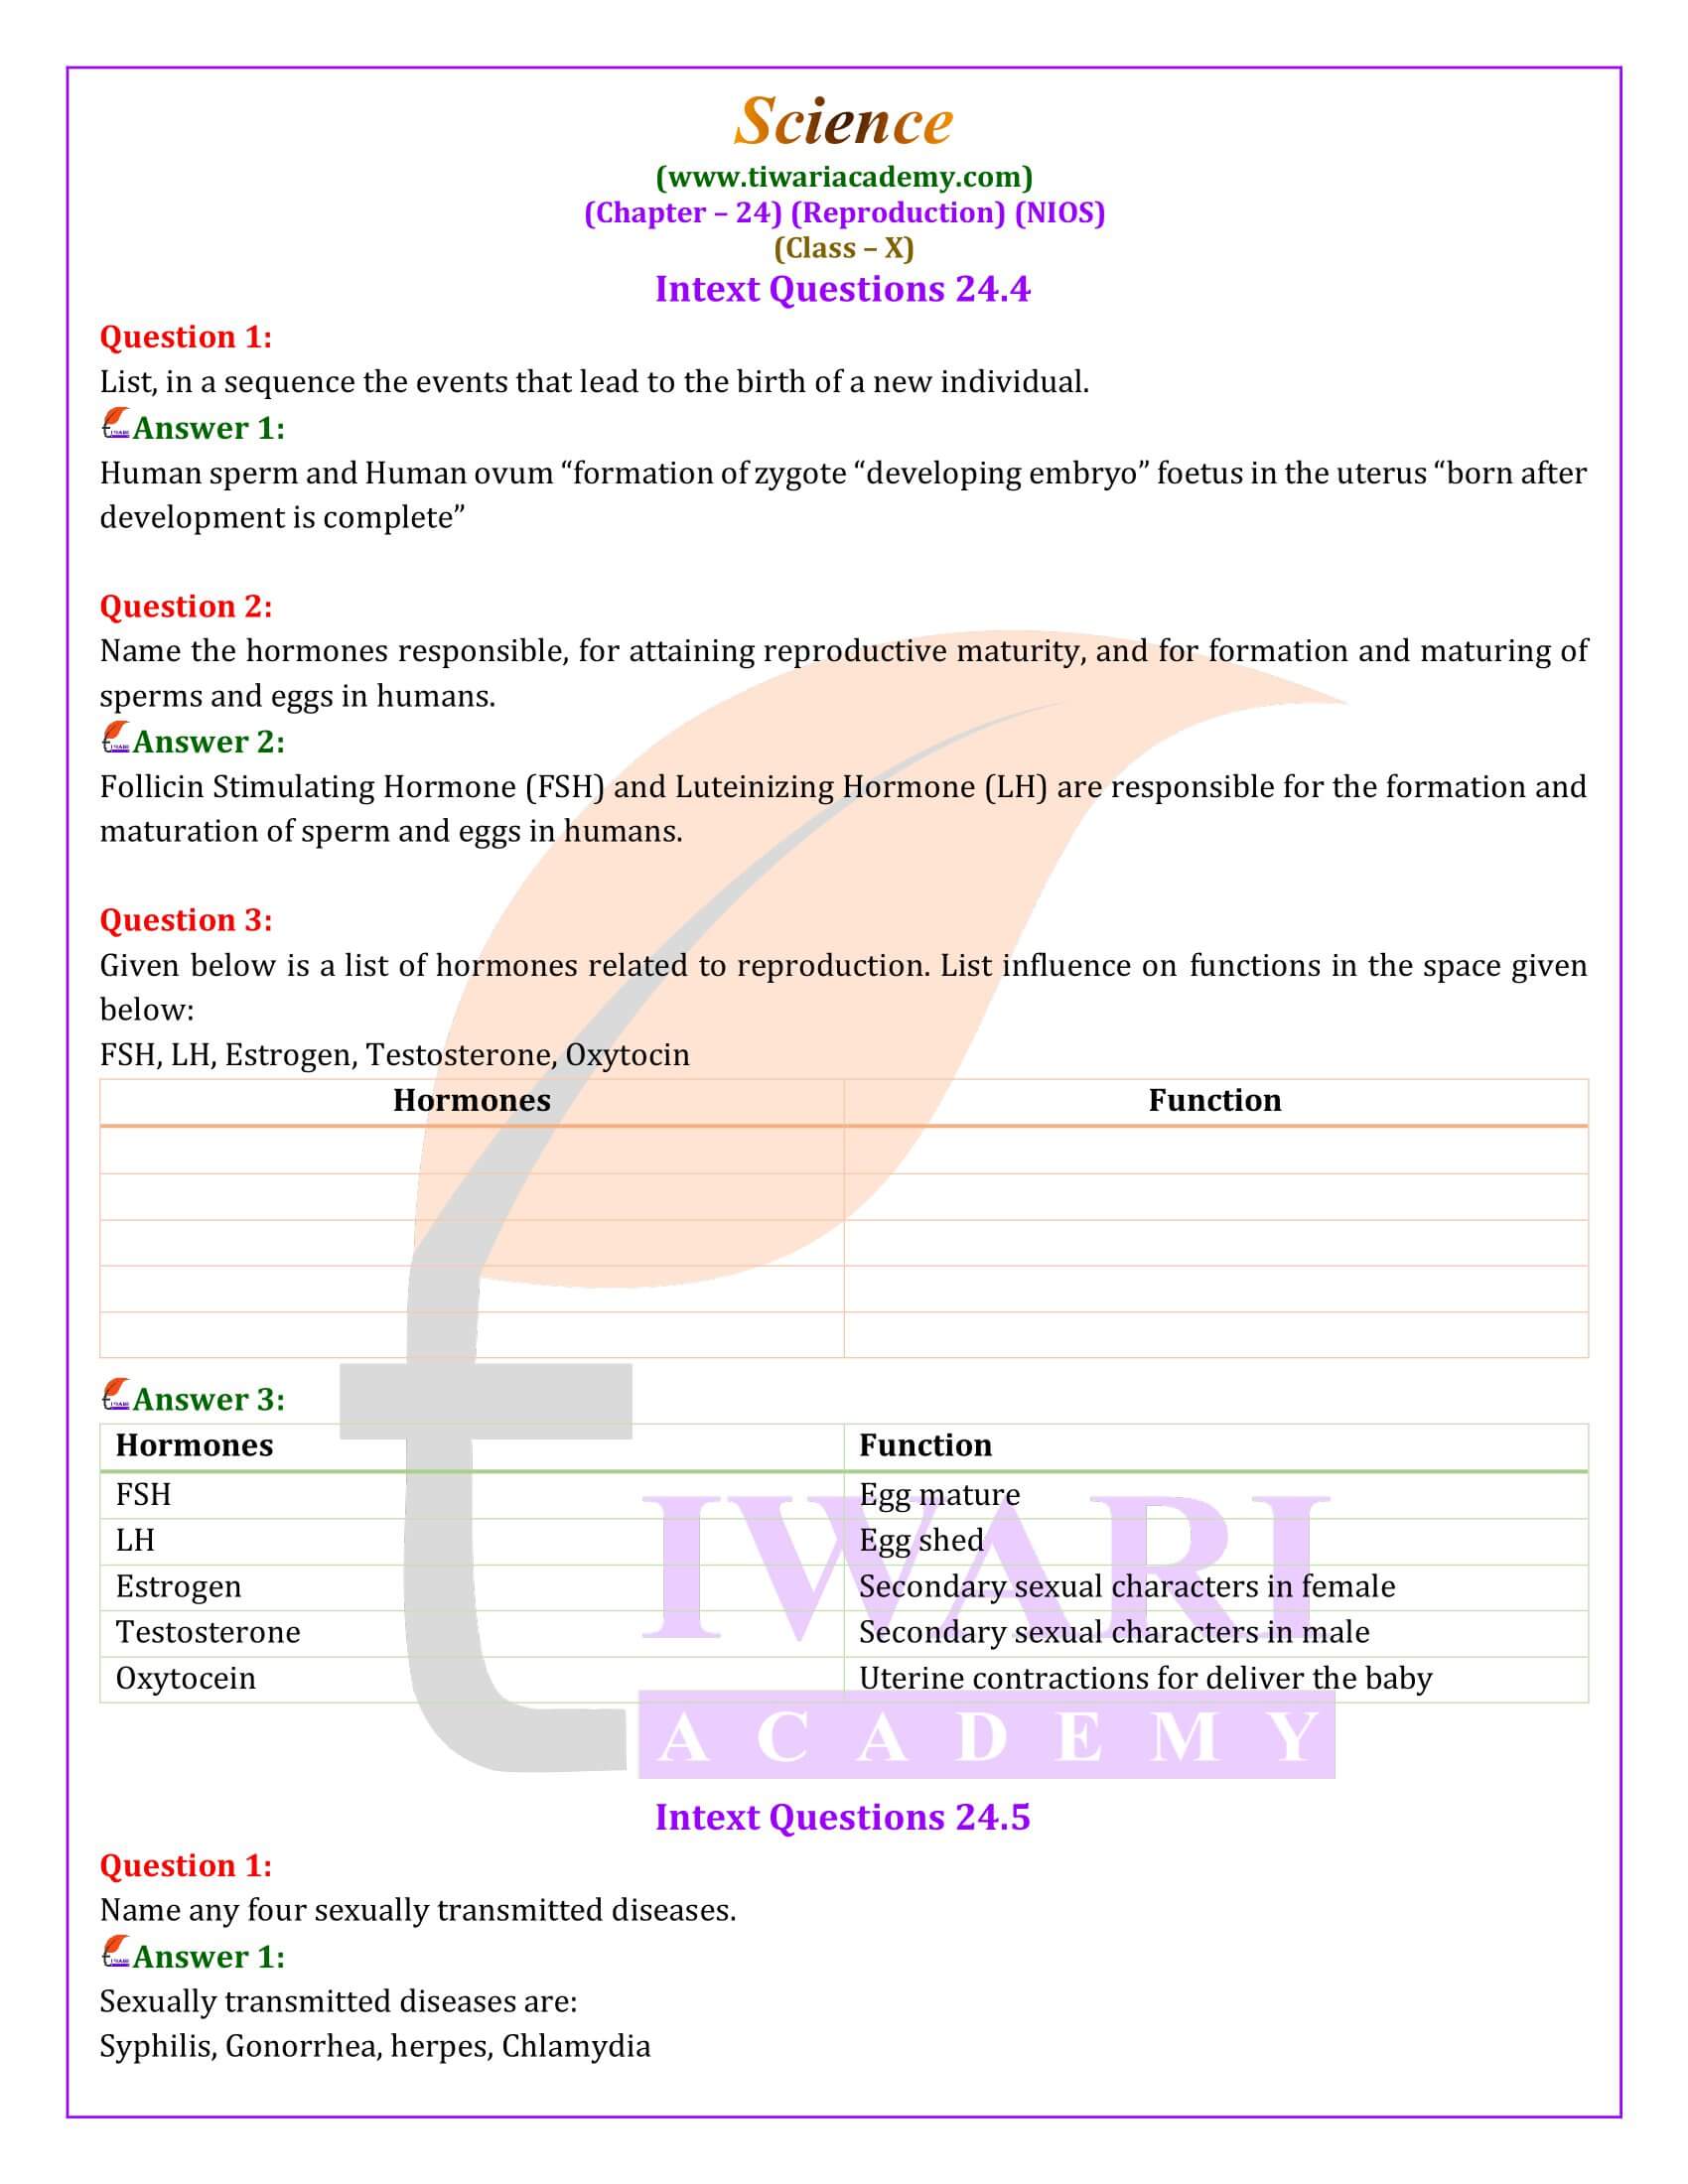 NIOS Class 10 Science Chapter 24 Question Answers